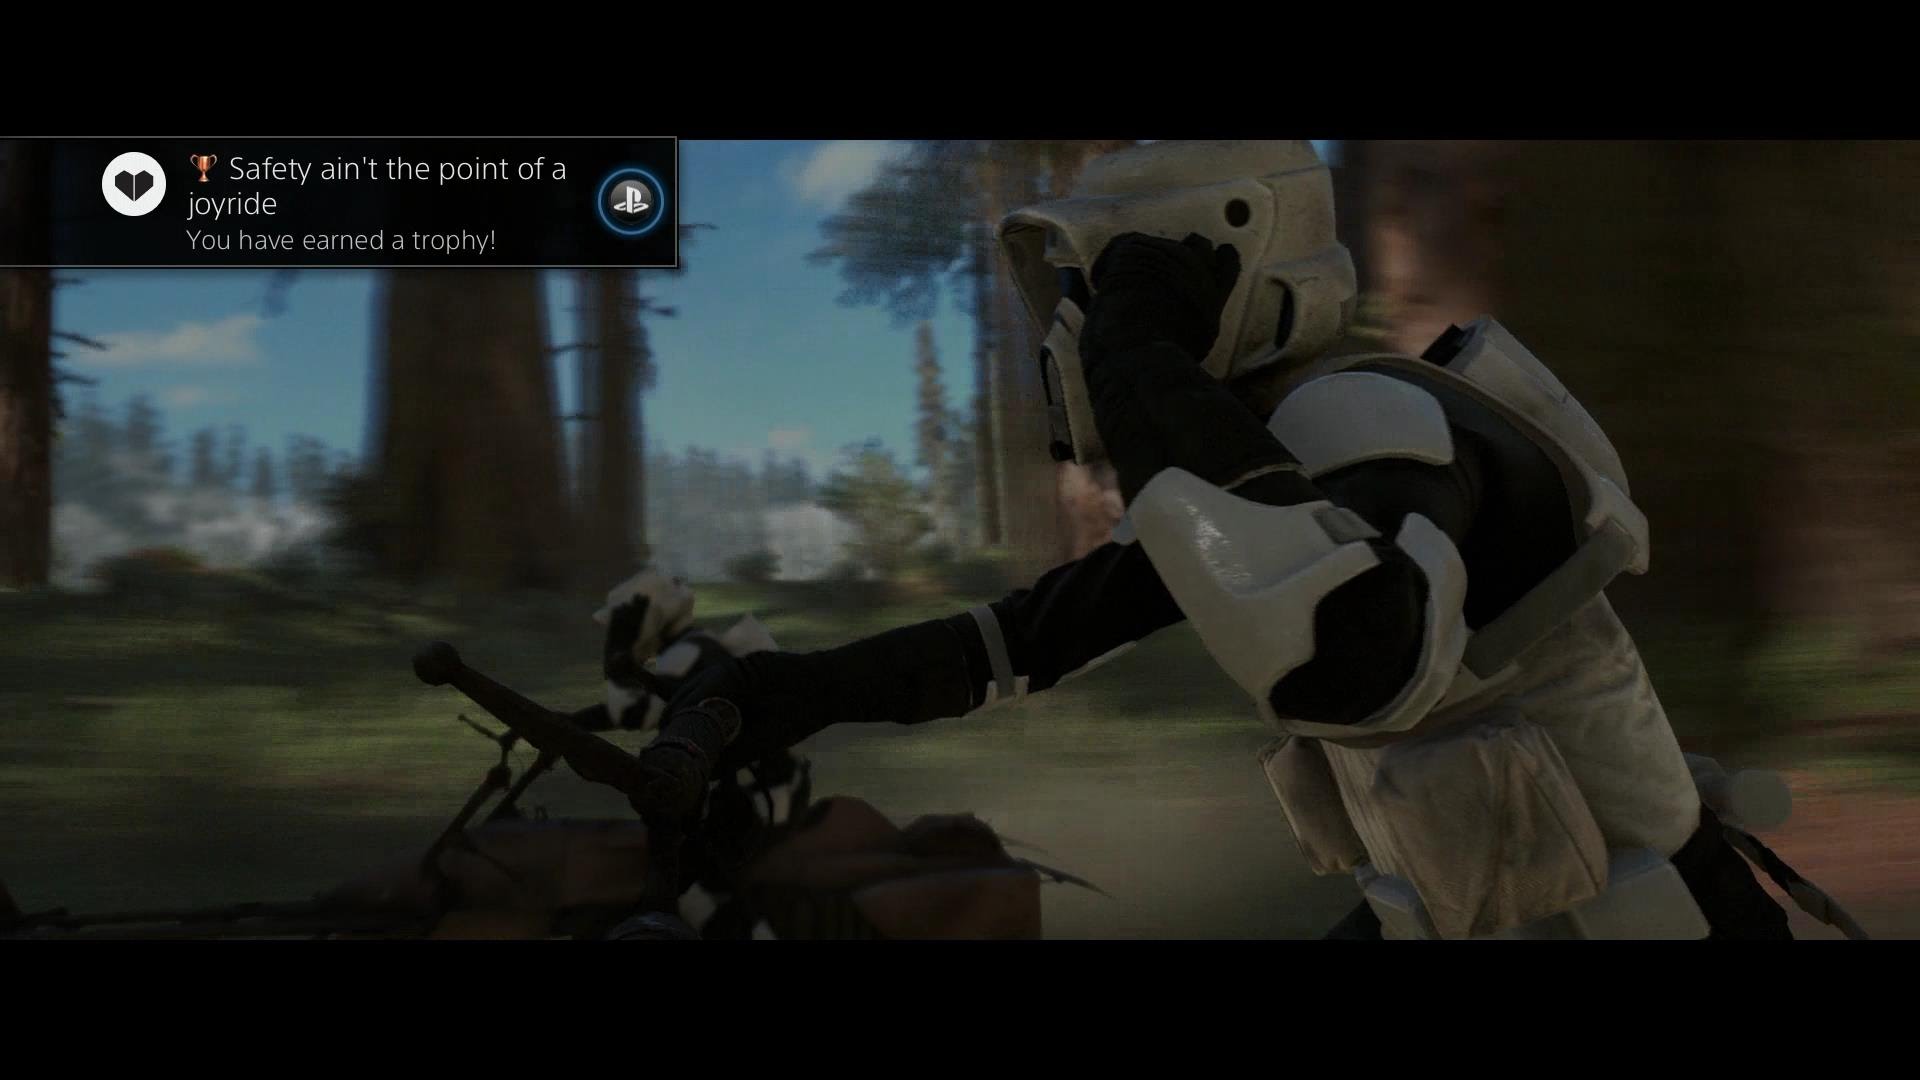 Star Wars Battlefront: “Safety ain’t the point of the joyride” Trophy/Achievement – HTG